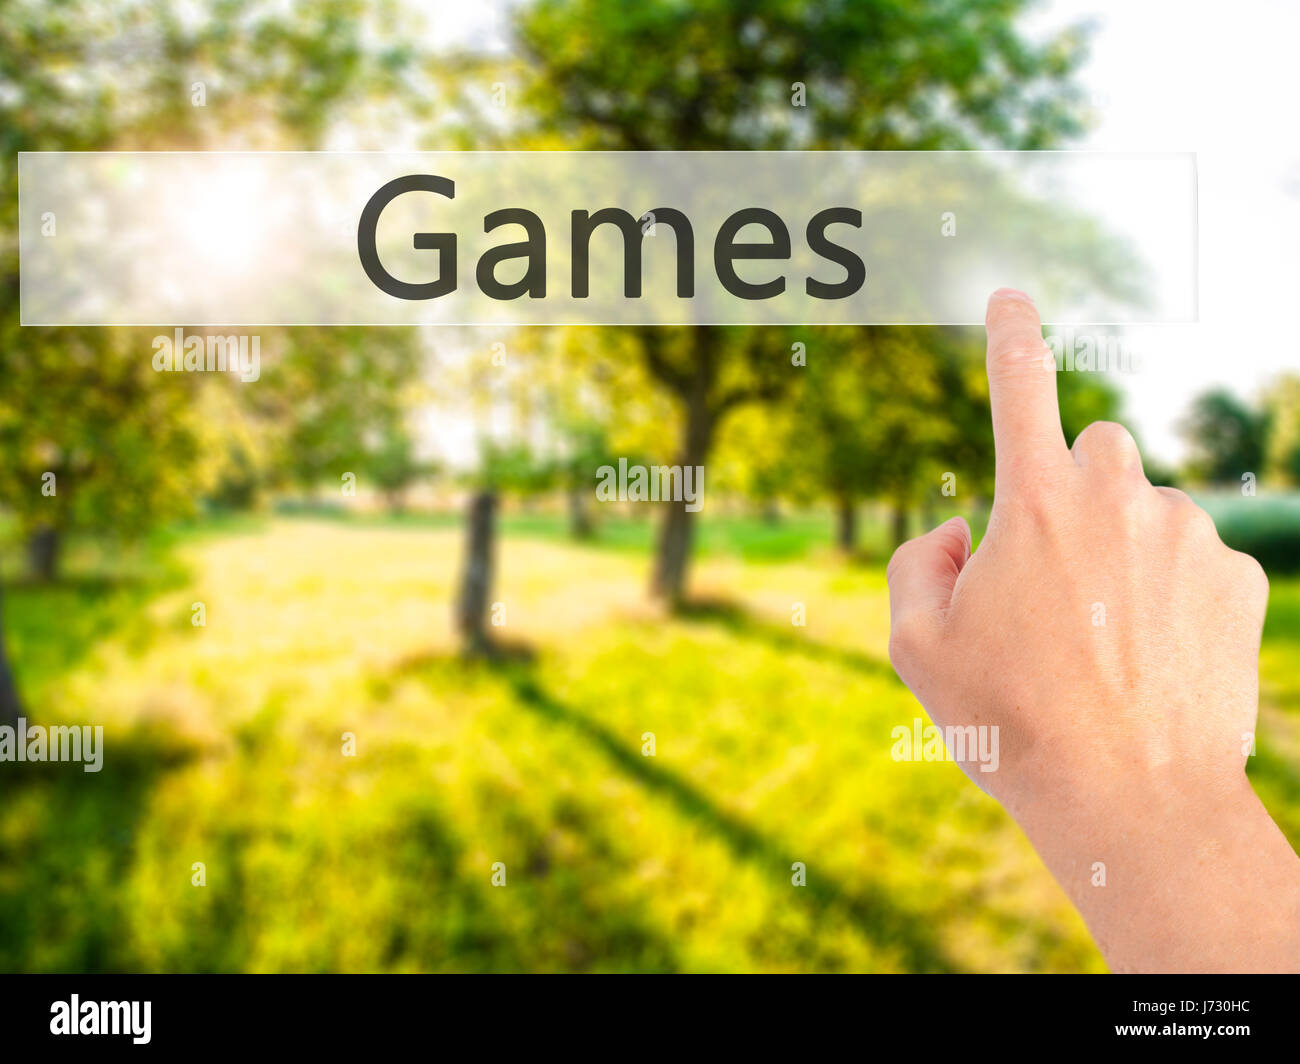 Games - Hand pressing a button on blurred background concept . Business, technology, internet concept. Stock Photo Stock Photo